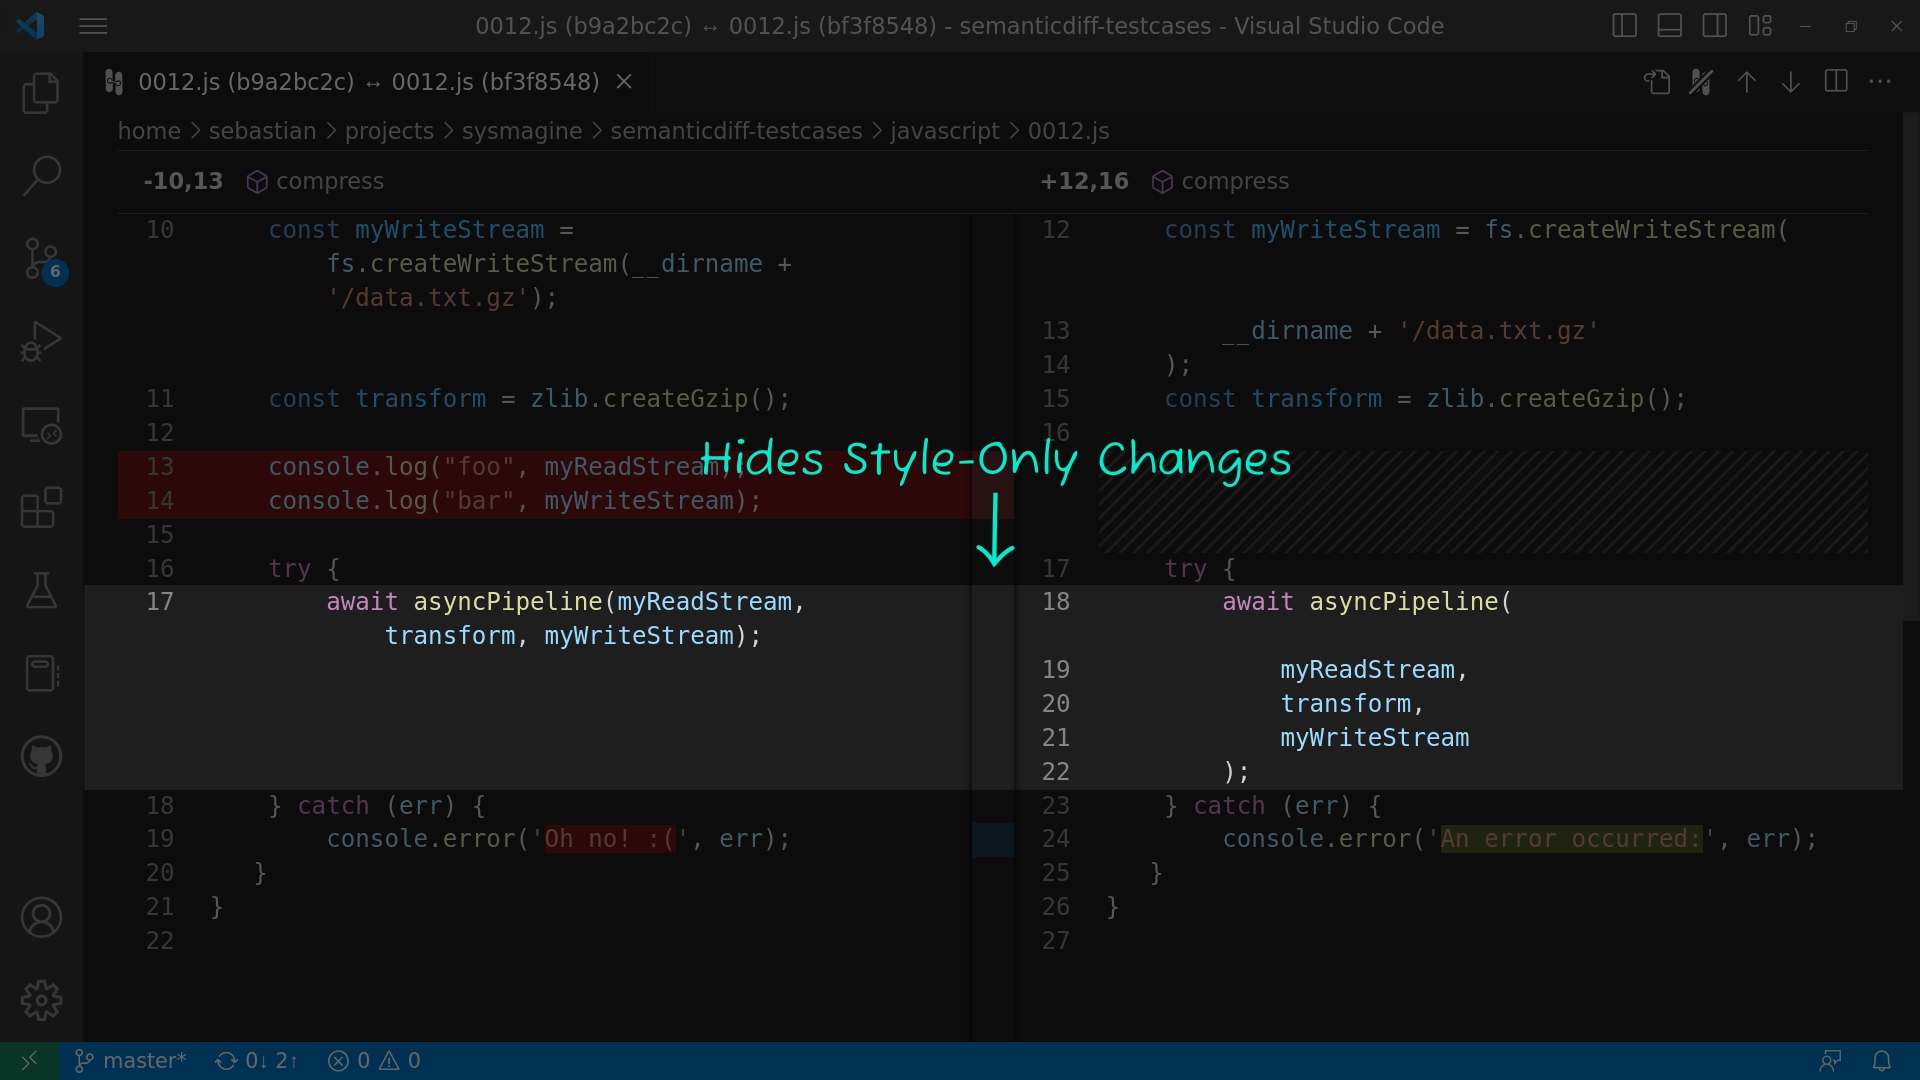 Style changes are hidden in SemanticDiff - highlighted